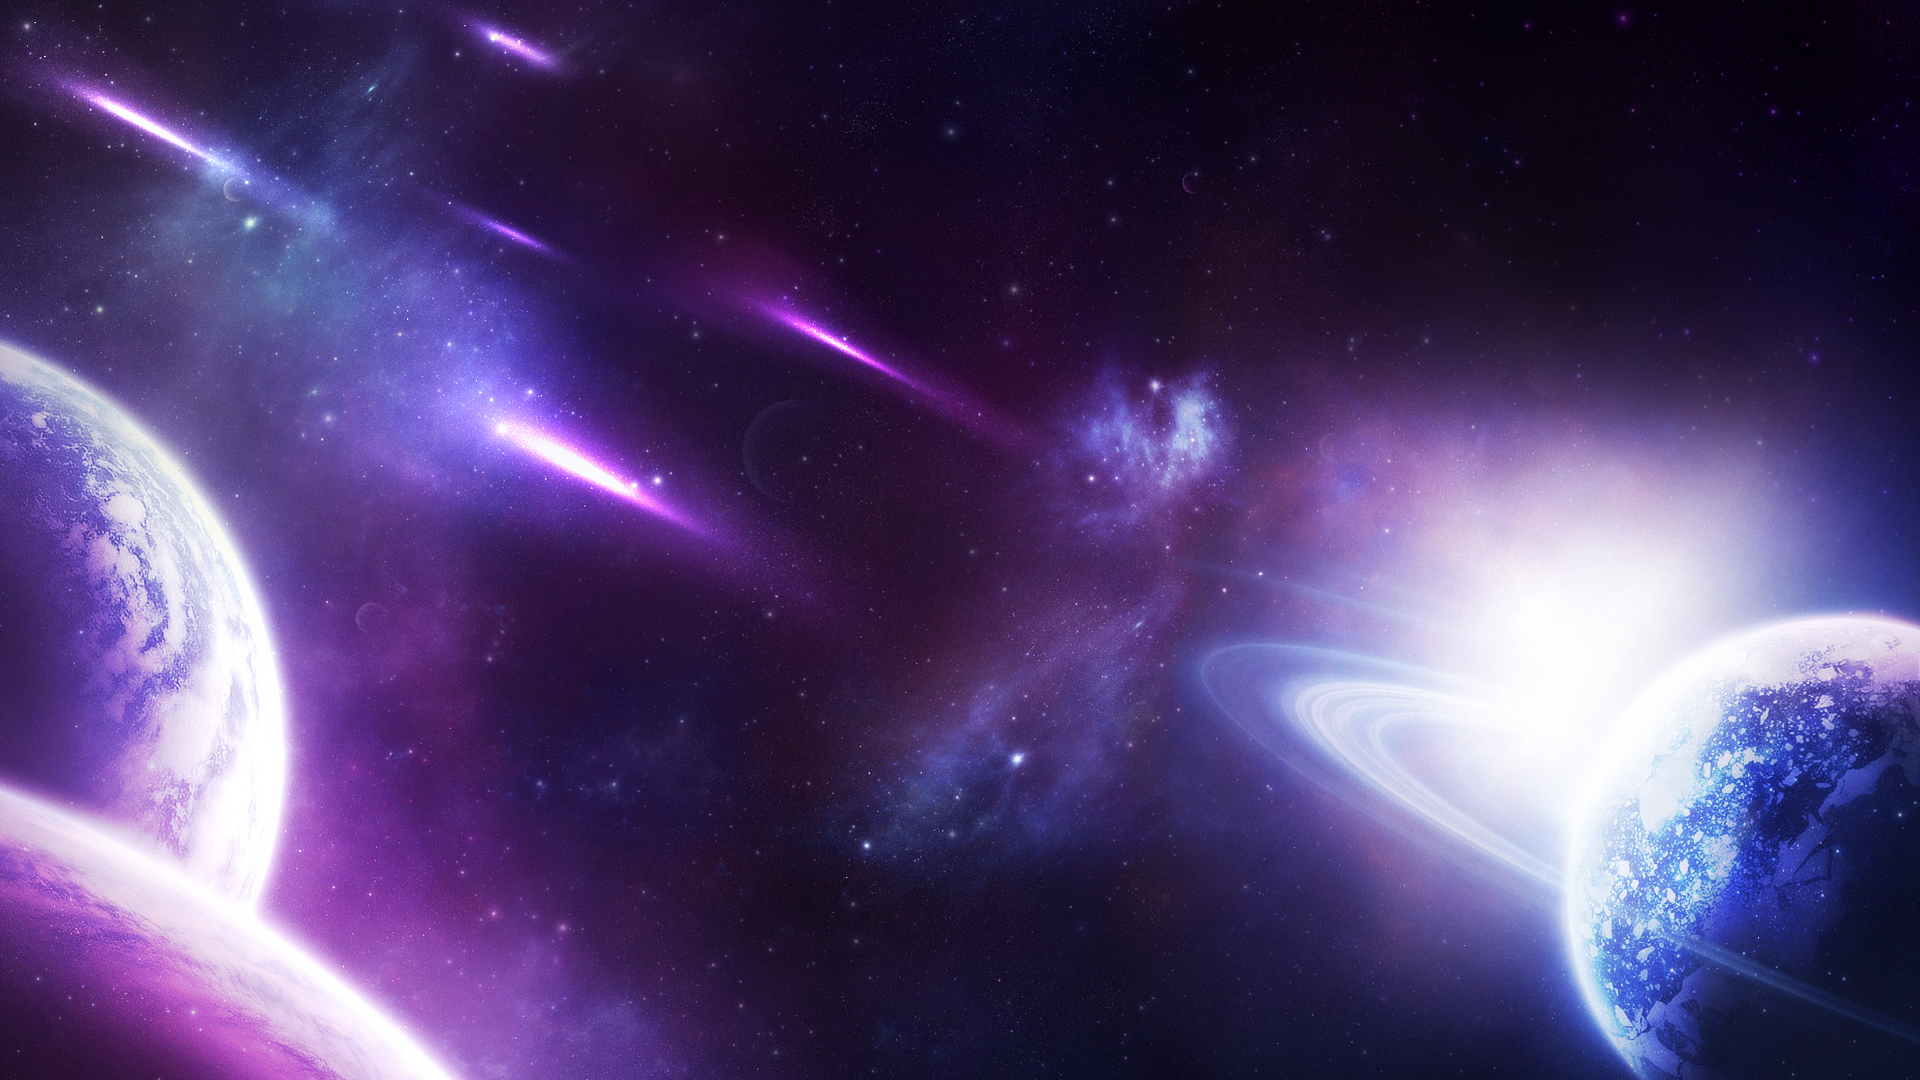 hd galaxy wallpapers 1080p for a laptop